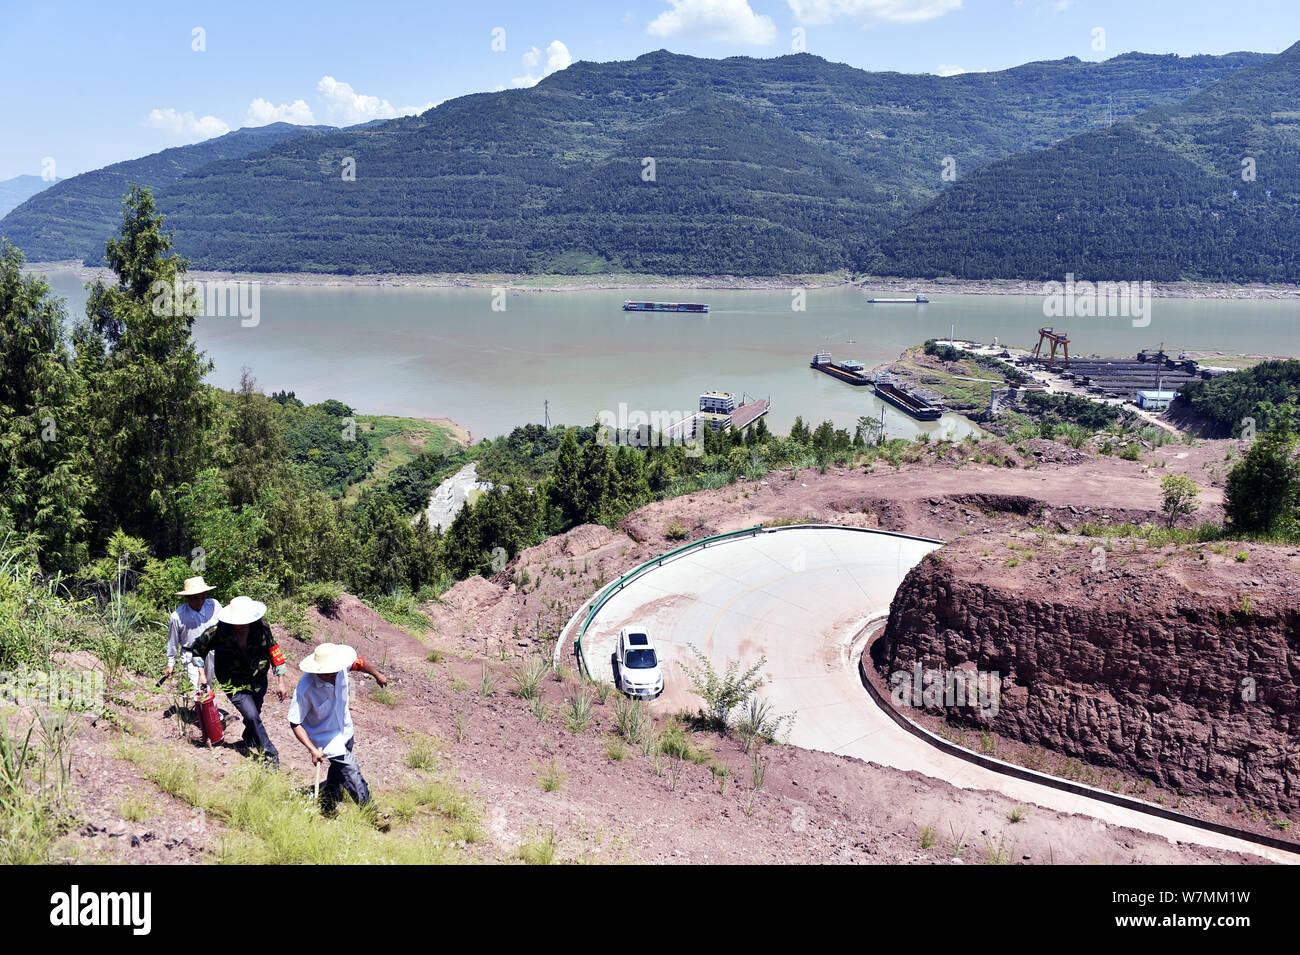 Forestry workers are patrolling along the Yangtze River despite scorching heat at Yunyang county in Chongqing, China, 24 July 2017.   Yunyang Forestry Stock Photo